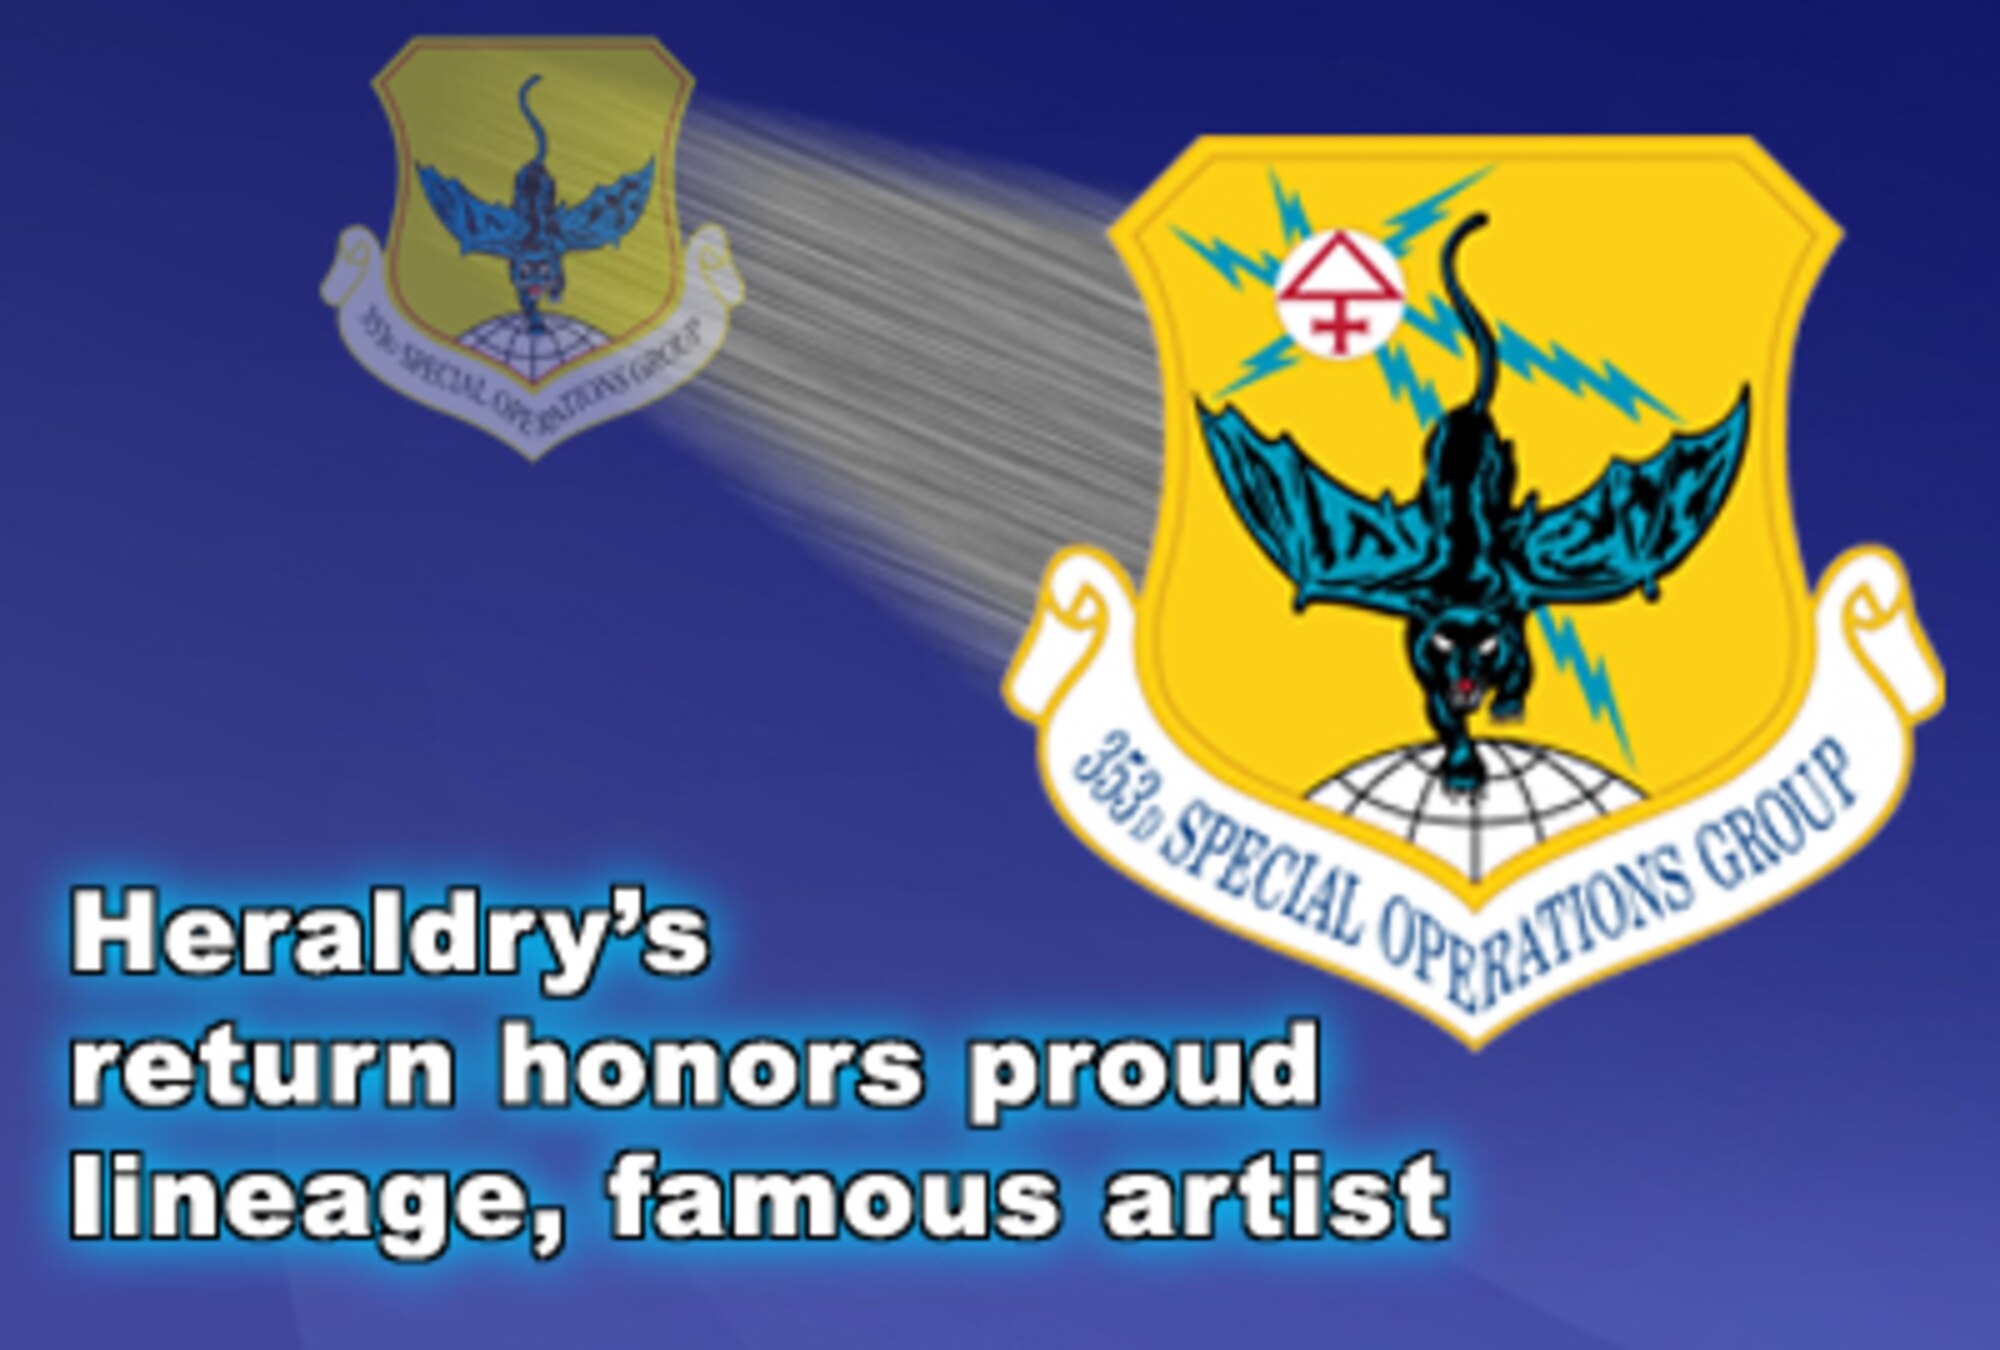 Air Force officials approved the 353rd Special Operations Group's request to reinstate its original emblem, which cartoonist Milton Caniff designed the original emblem specifically for the 553rd Reconnaissance Wing, a unit the 353rd SOG traces its lineage to, and officially signed his original artwork design for the emblem over to the U.S. Air Force April 13, 1967. 